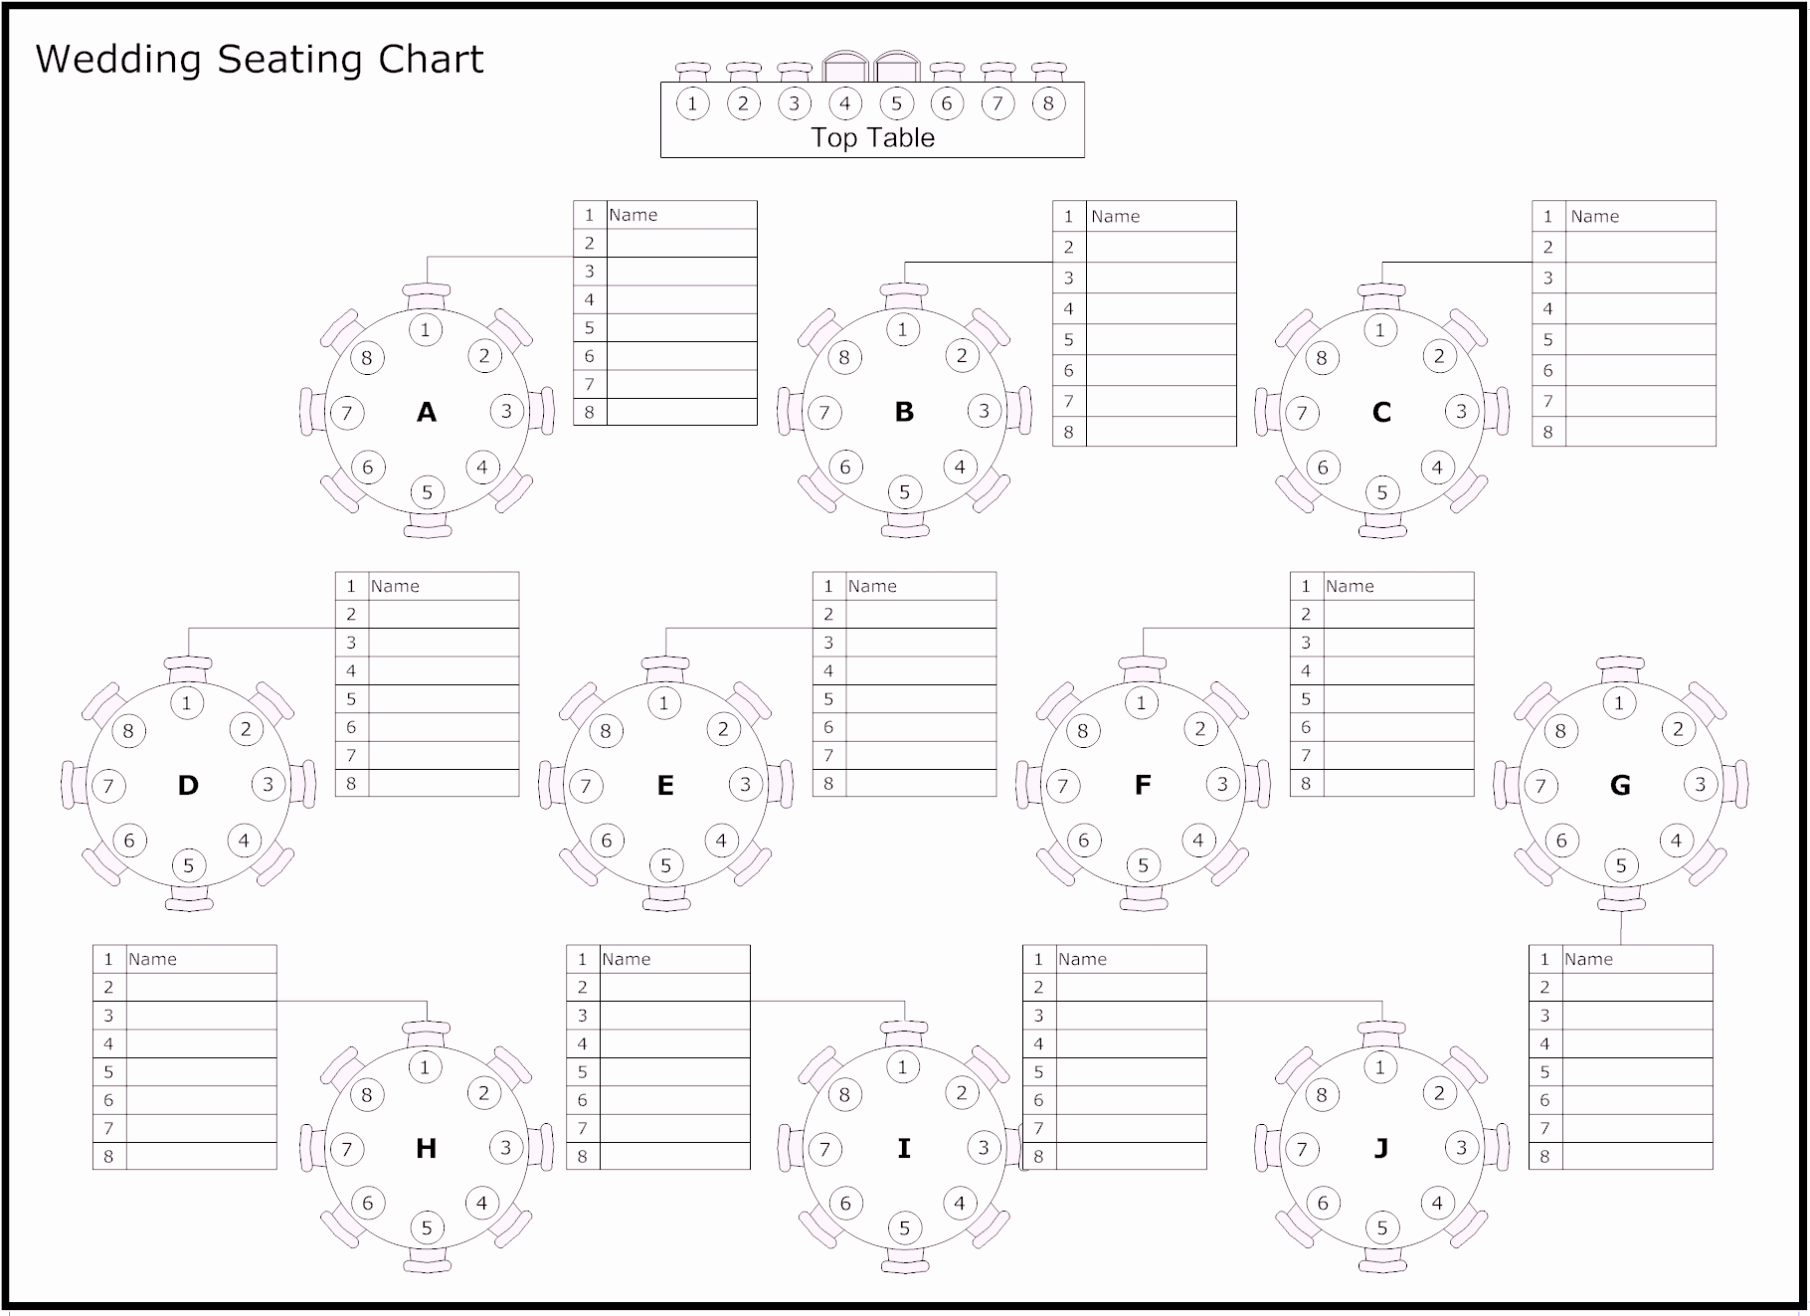 Restaurant Seating Chart Template Excel Inspirational Dining Room Table that Seats 10 Campbell Gallery